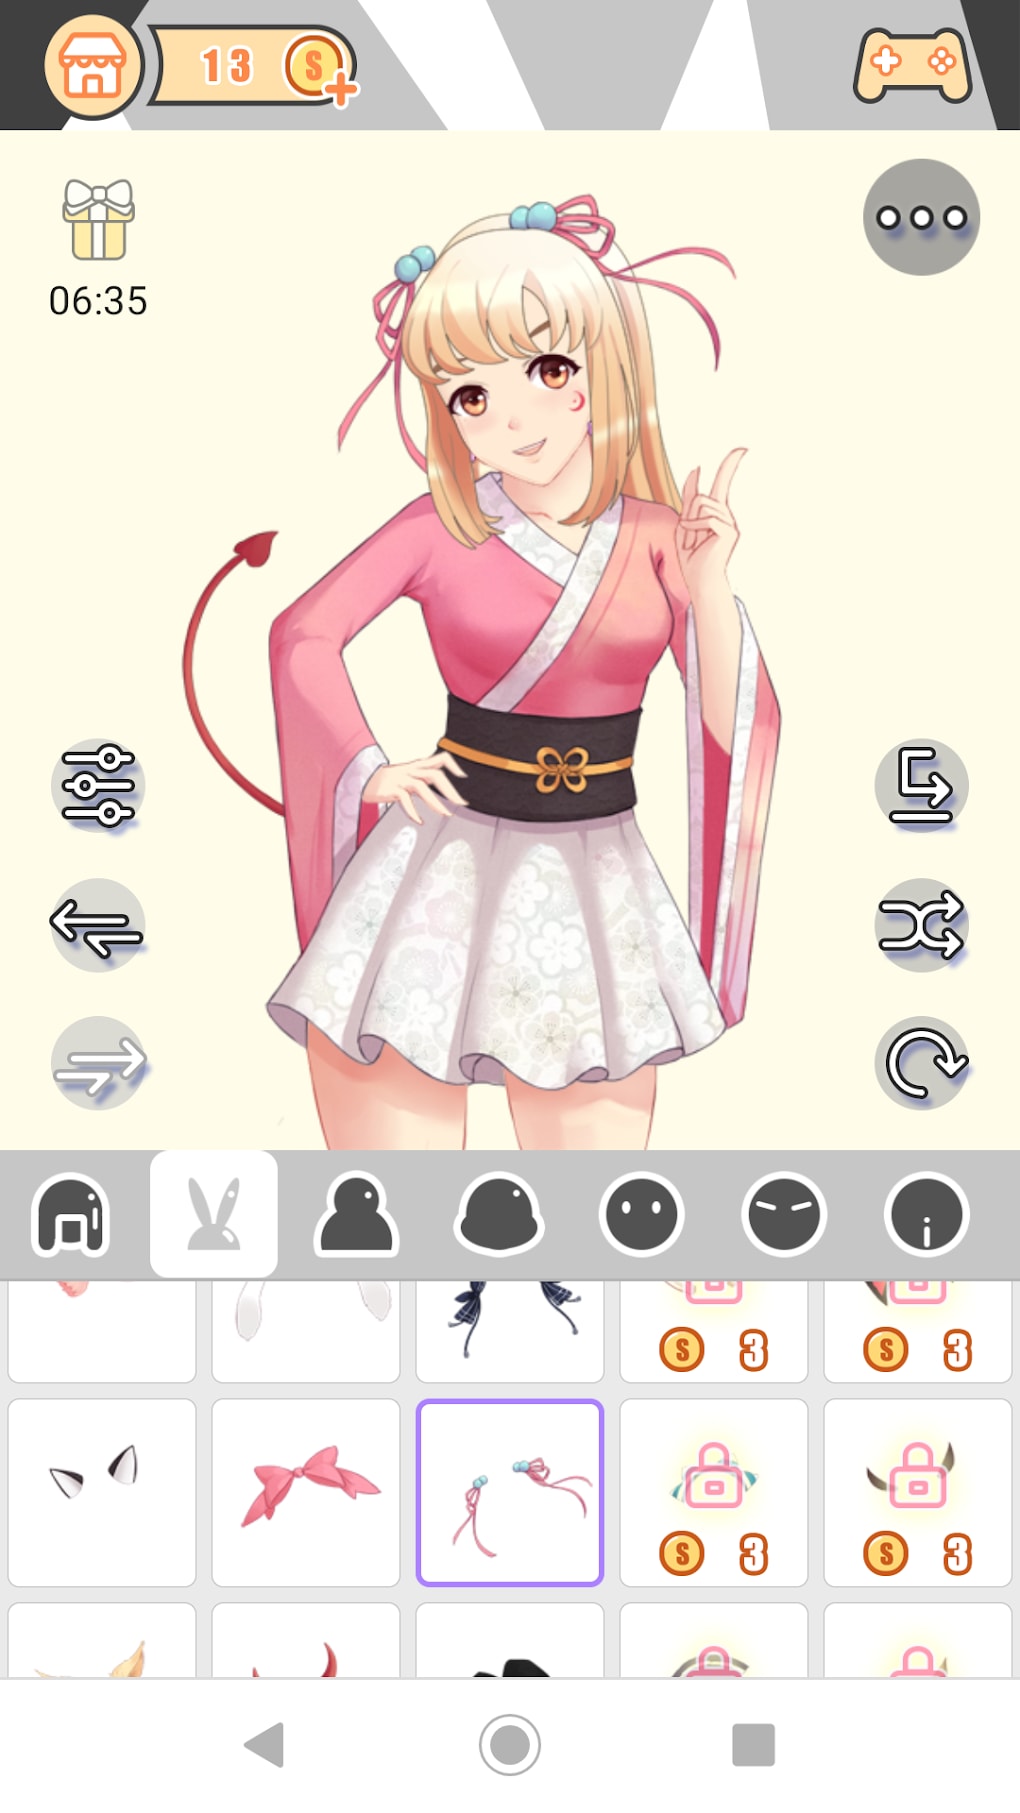 Anime Avatar Maker  Face Creator Make Your Own CharacterAmazoncomAppstore  for Android